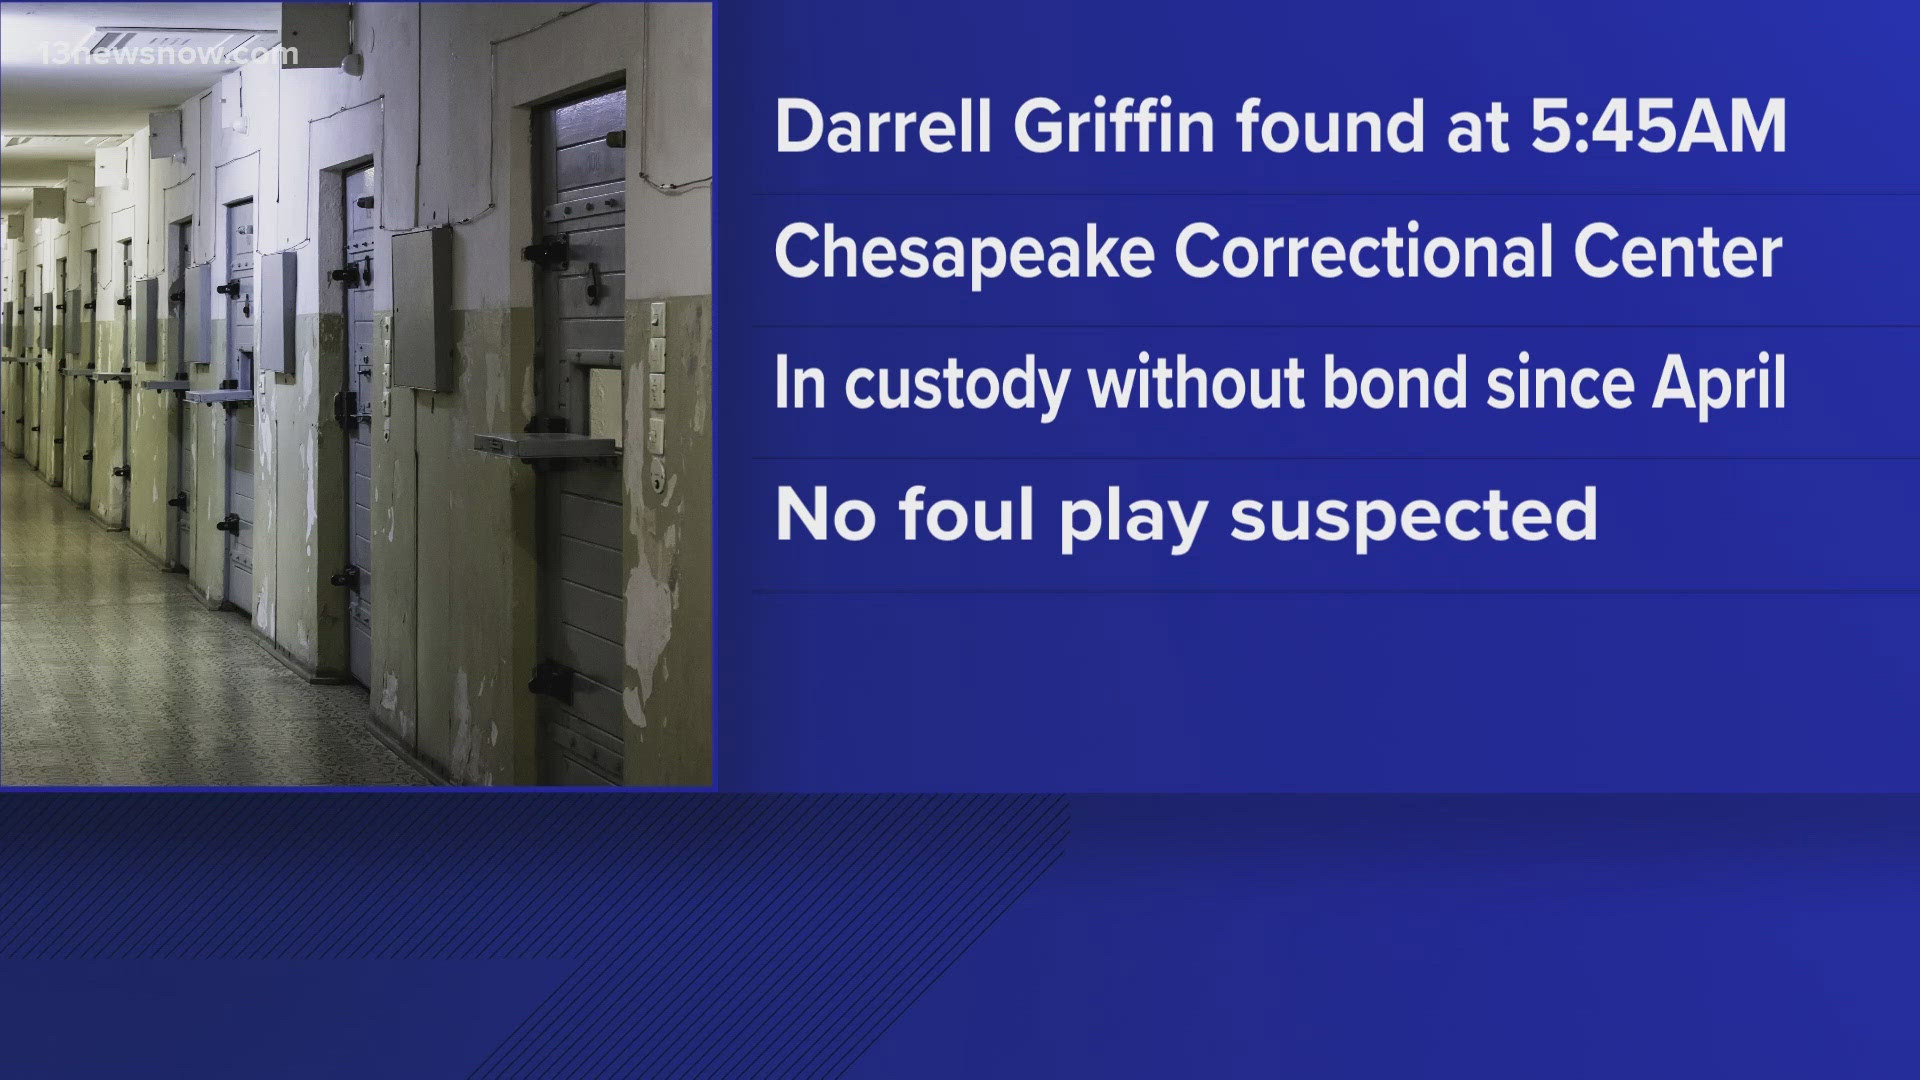 An investigation is underway after an inmate died at the Chesapeake Correctional Center.